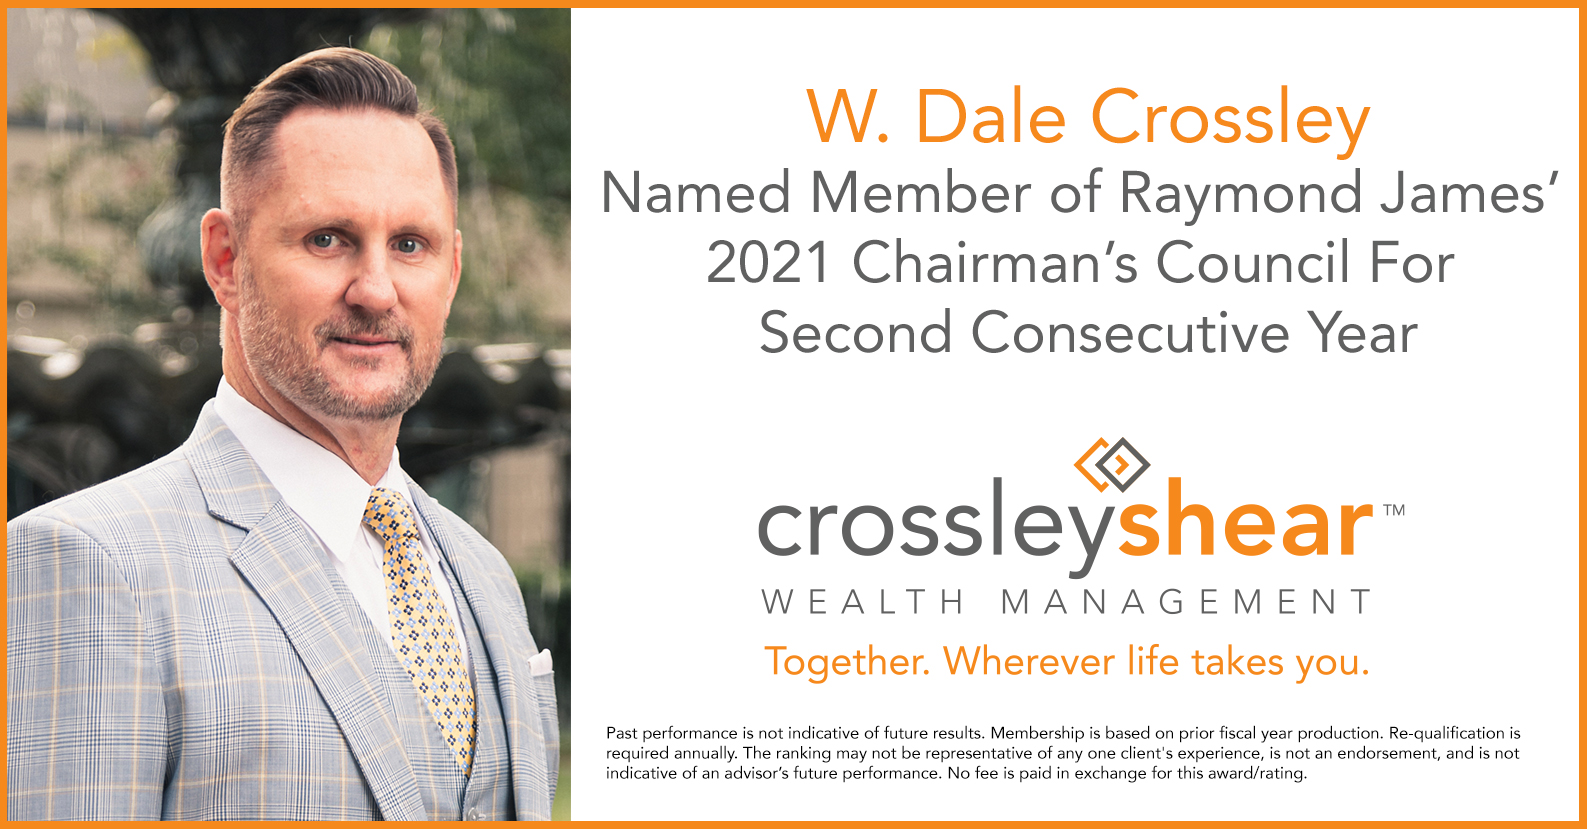 W. Dale Crossley Named Member of Raymond James’ 2021 Chairman’s Council for 2nd Consecutive Year